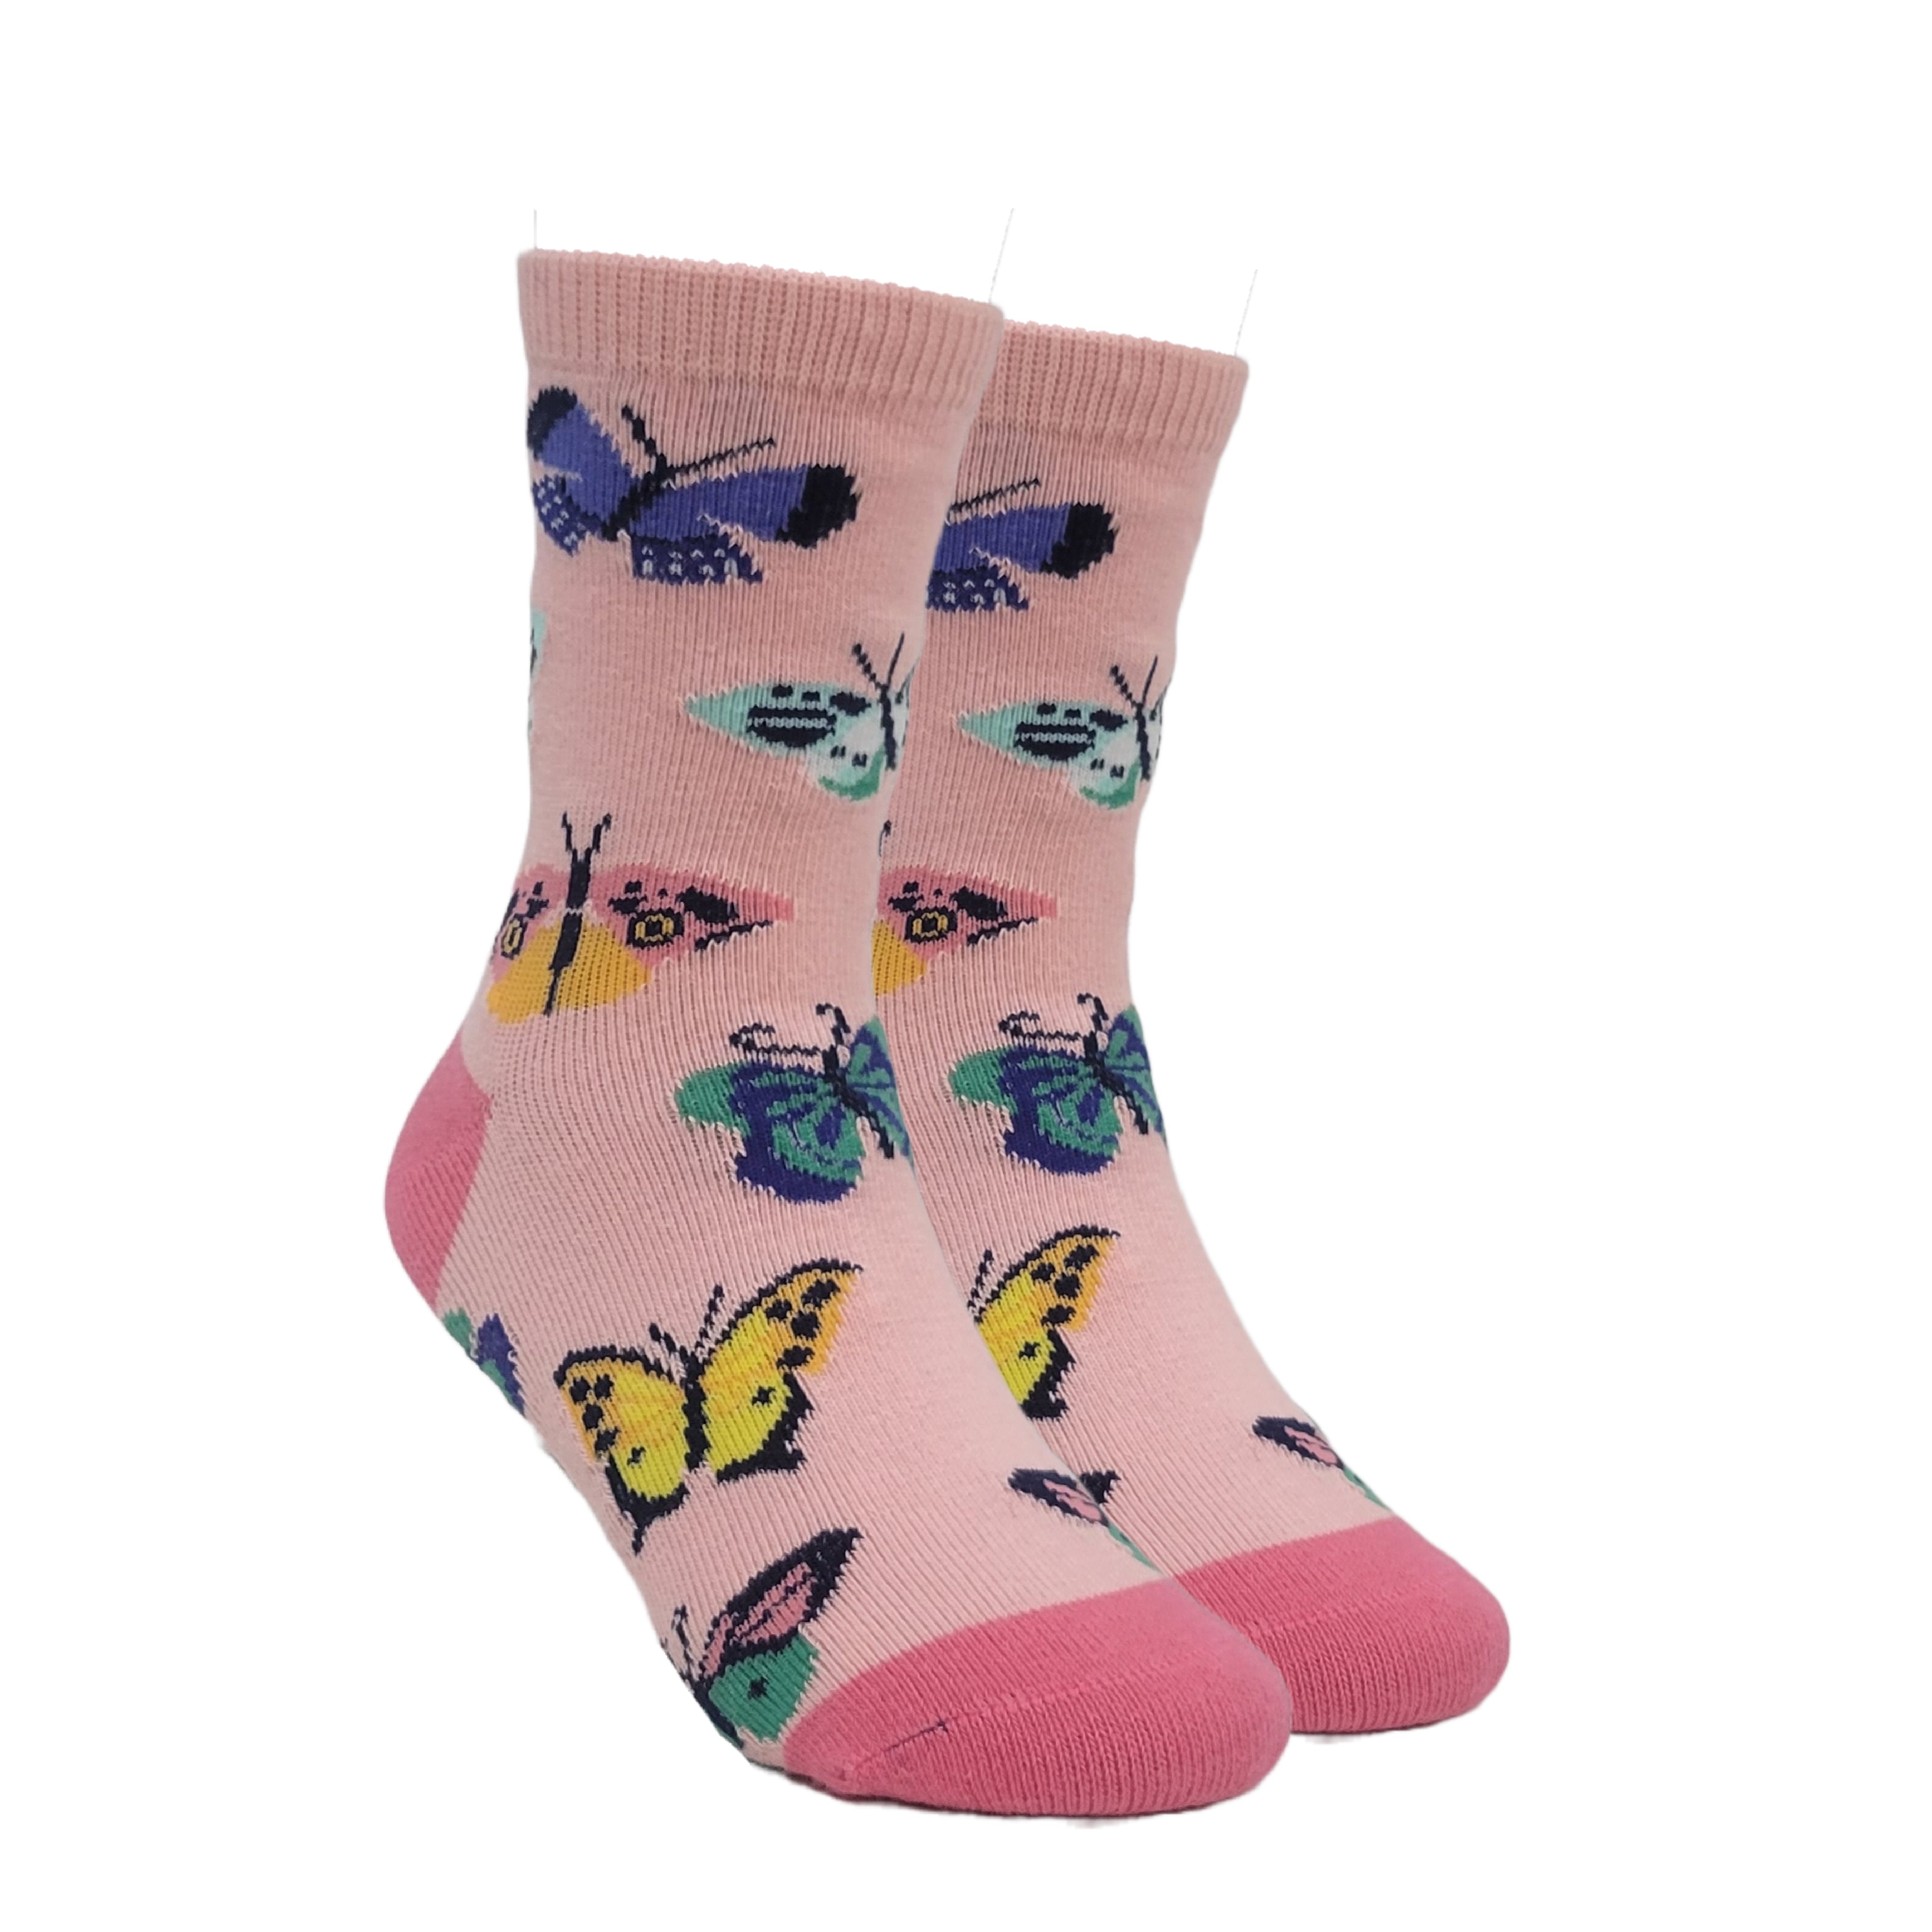 BUTTERFLY MIGRATION Pattern Socks (Ages 1-2, 3-5)